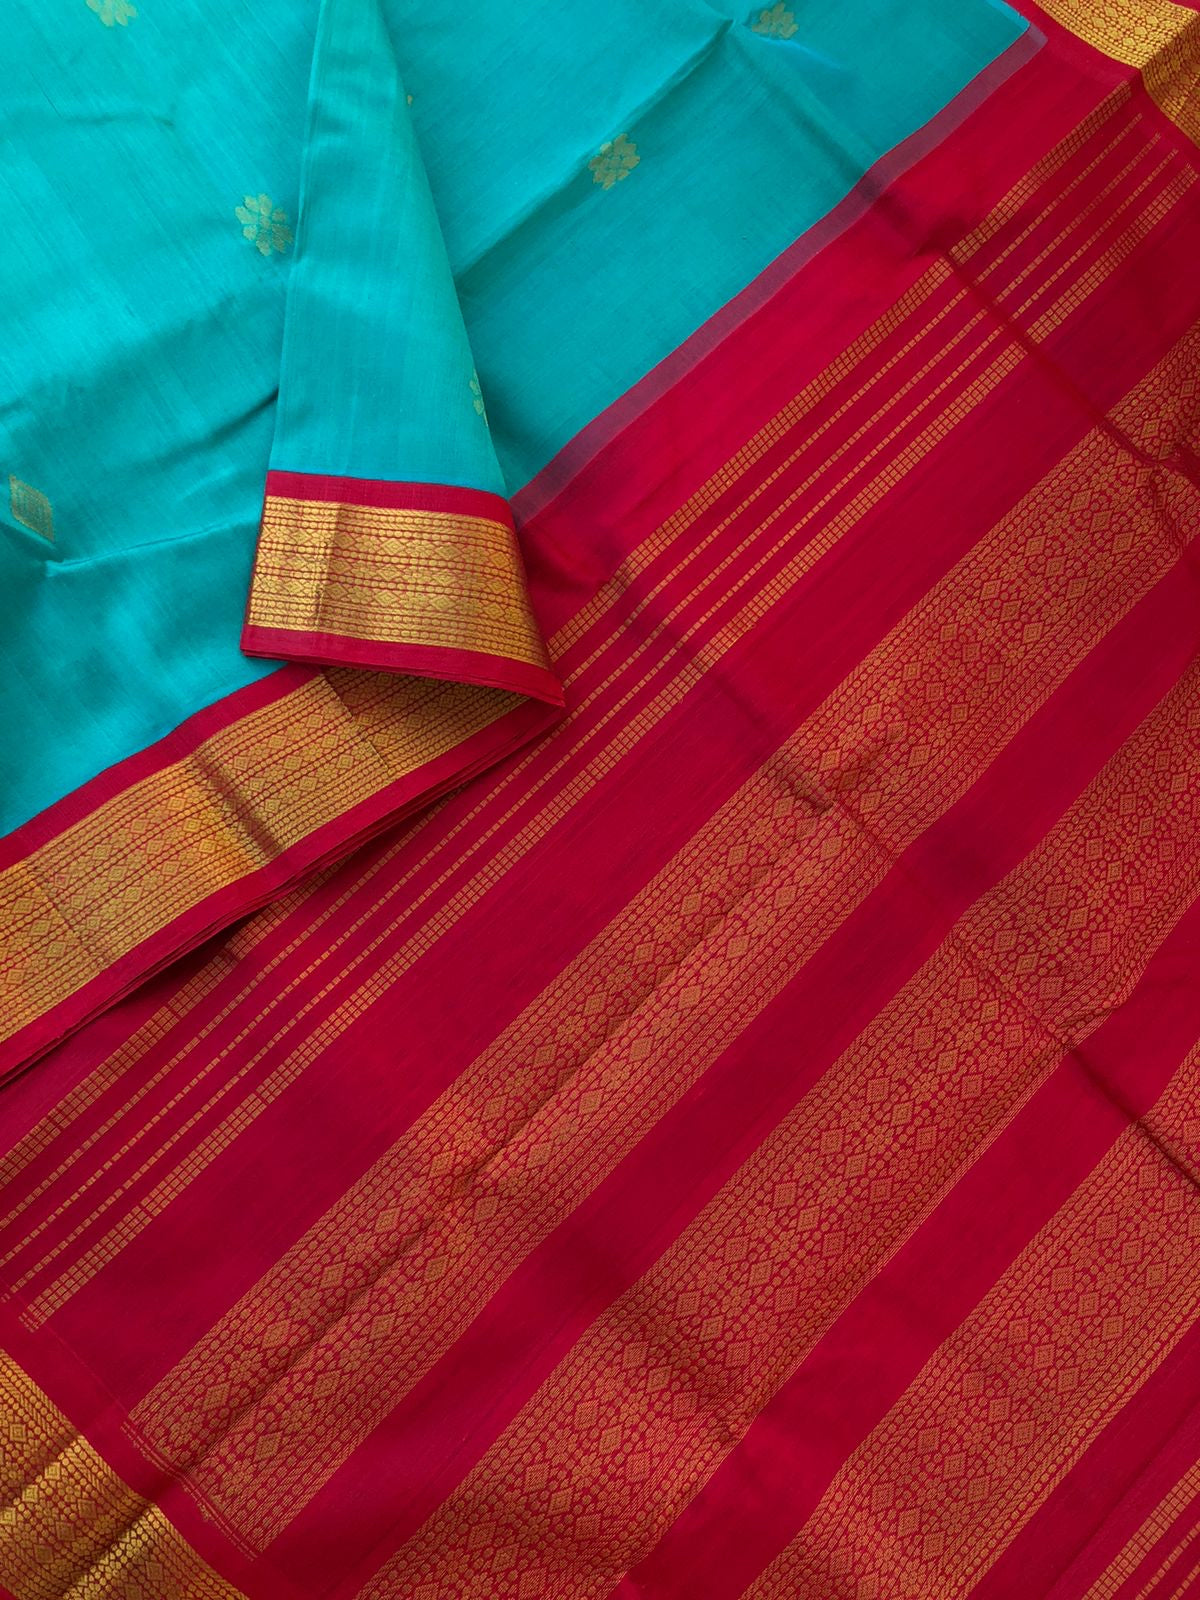 Margazhi Vibrs on Korvai Silk Cotton - teal and red